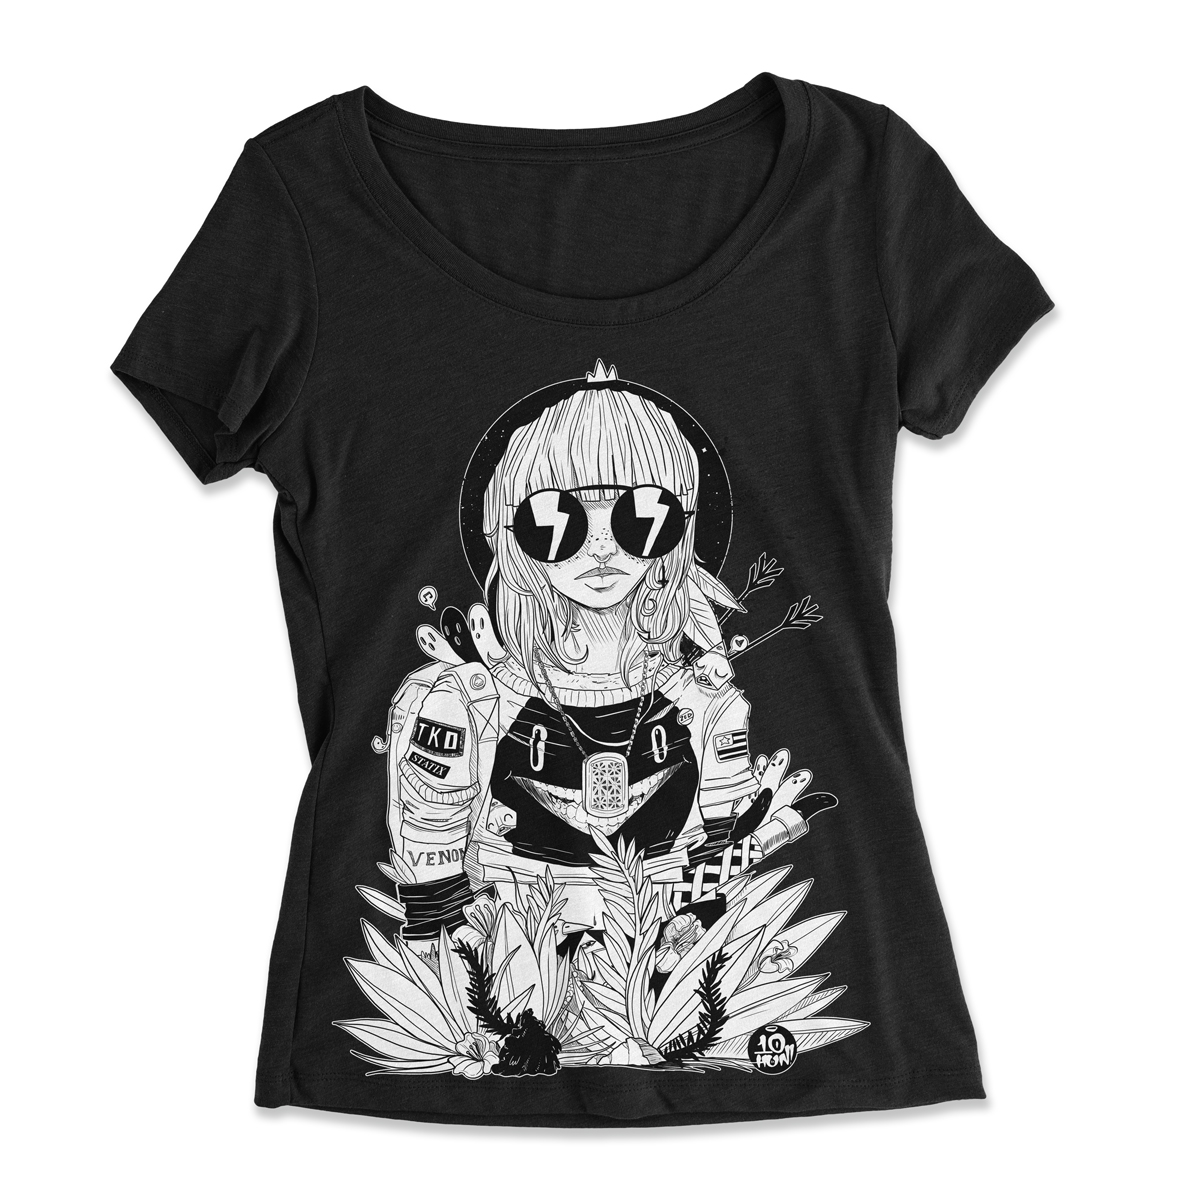 black shirt with a black and white graphic of a space astronaught